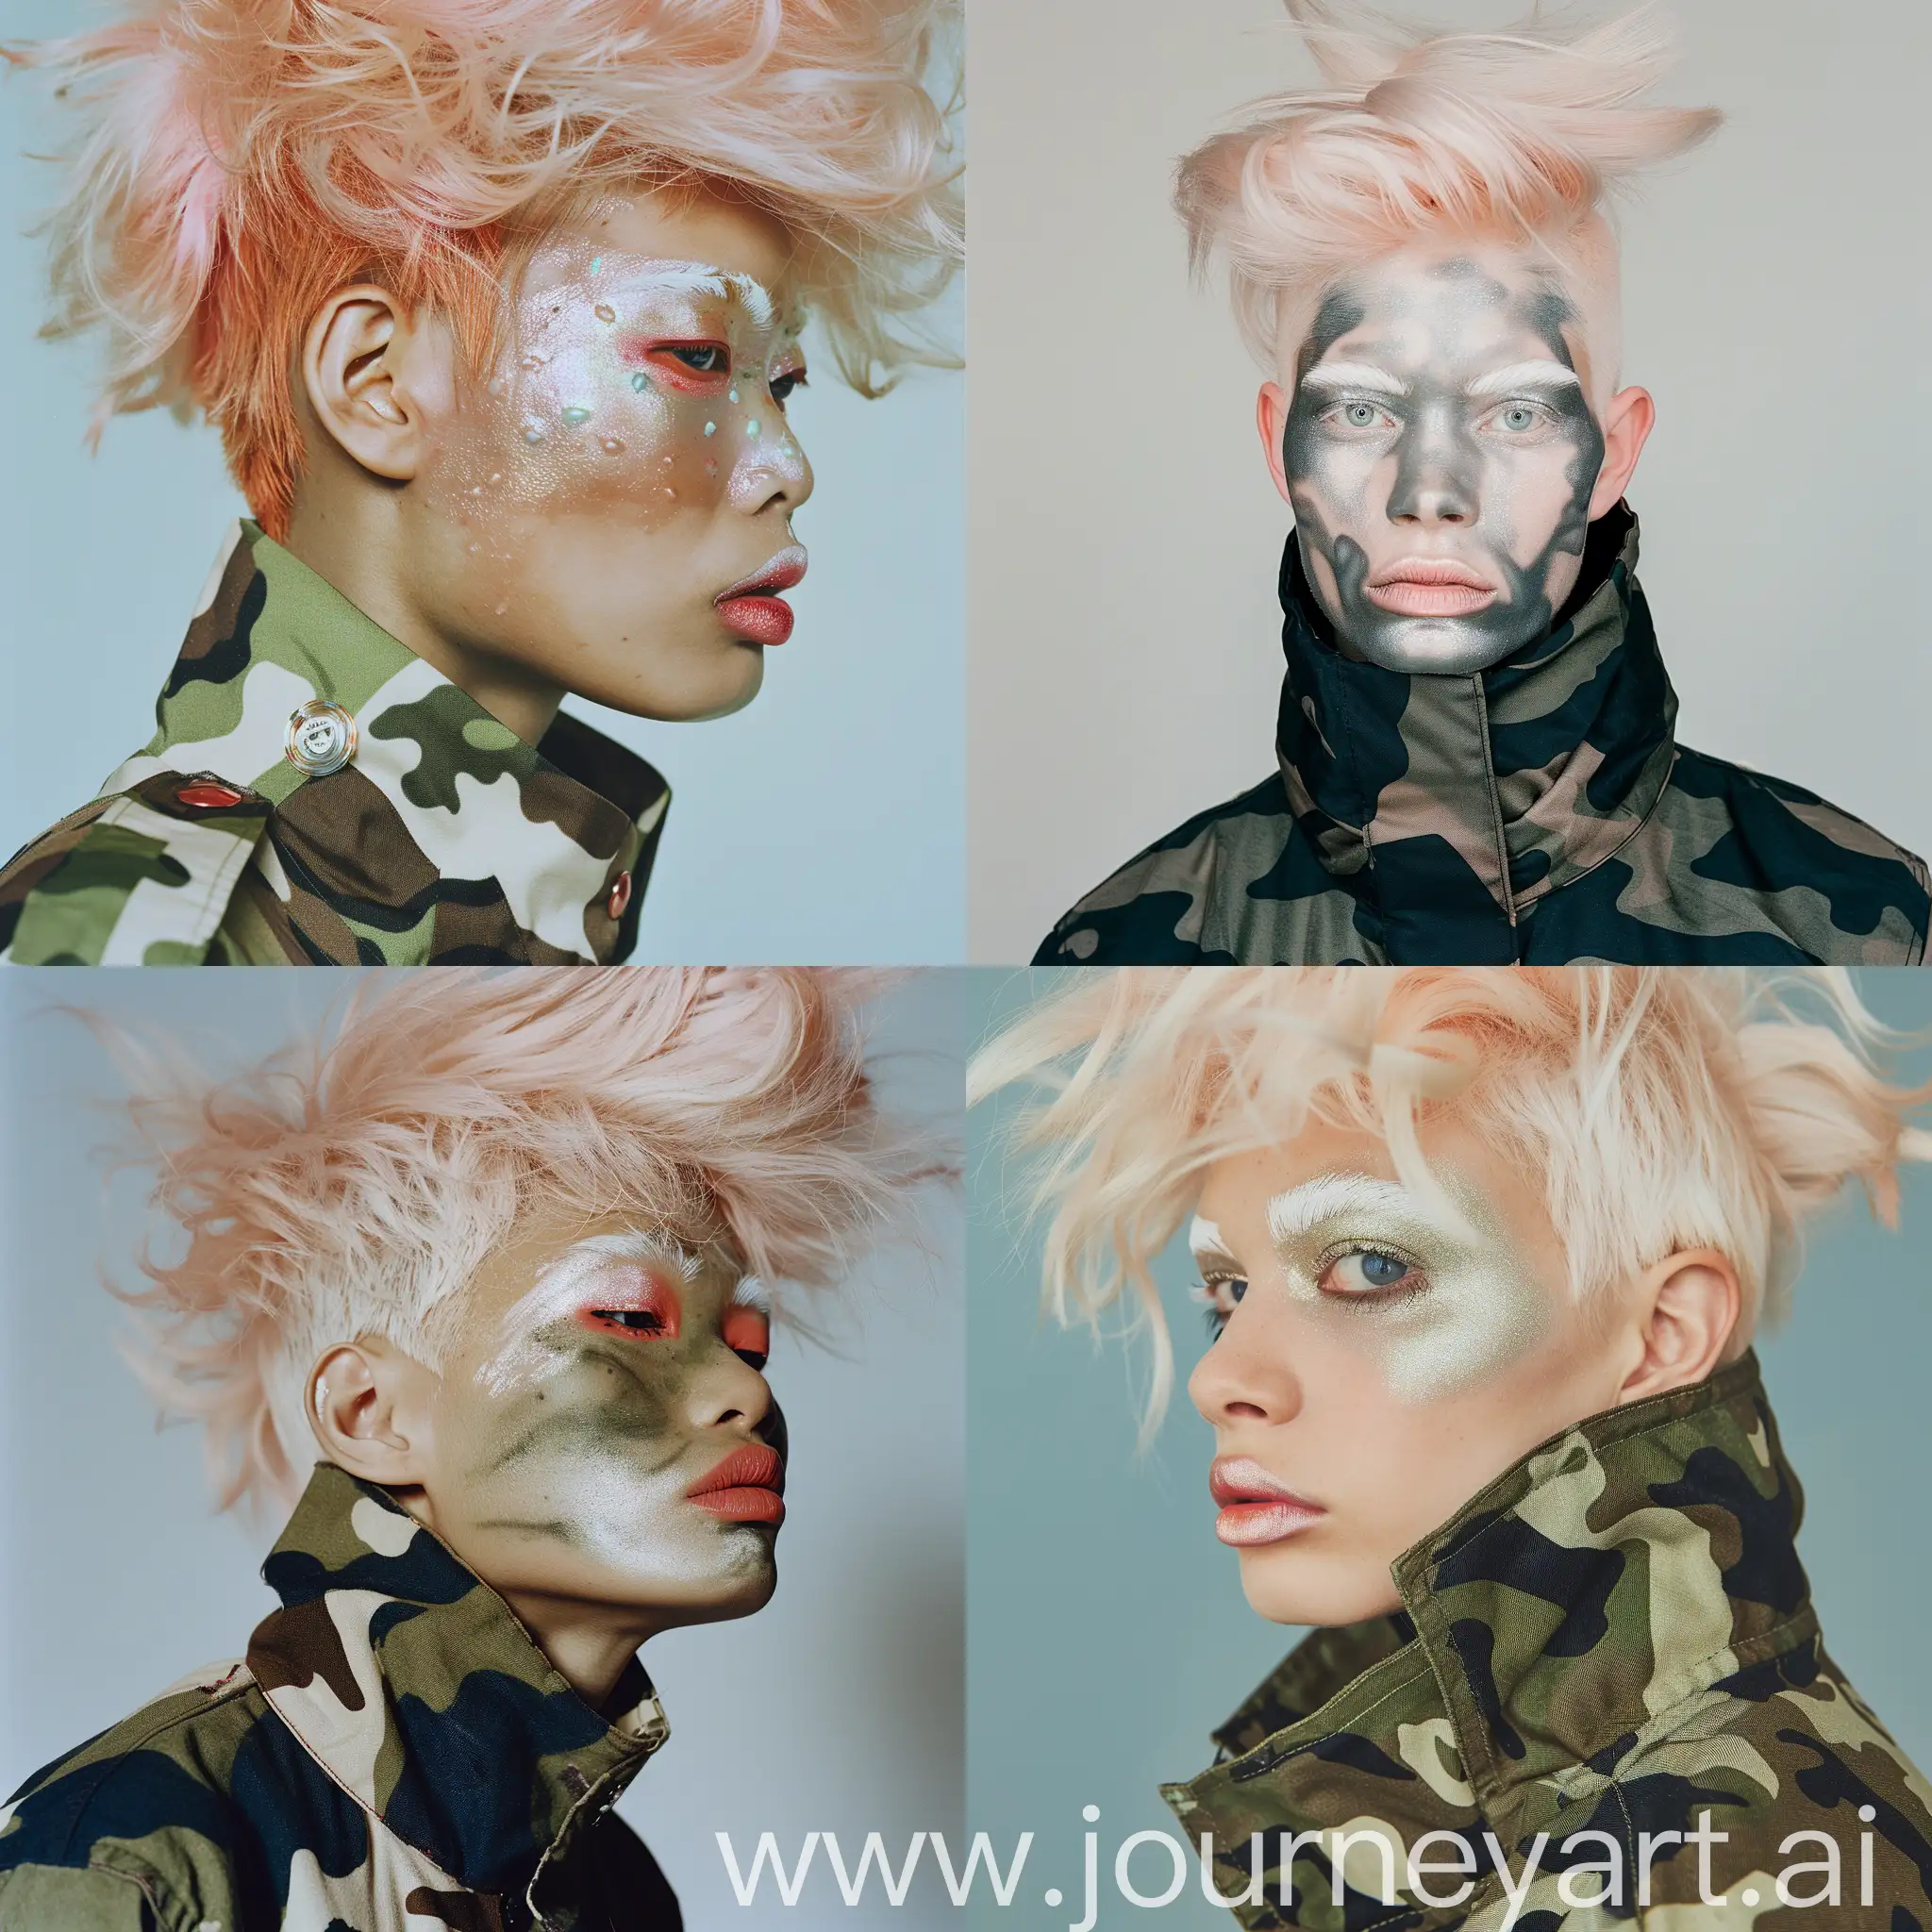 Extraterrestrial-in-Camouflage-Jacket-with-Pearlescent-Makeup-Studio-Portrait